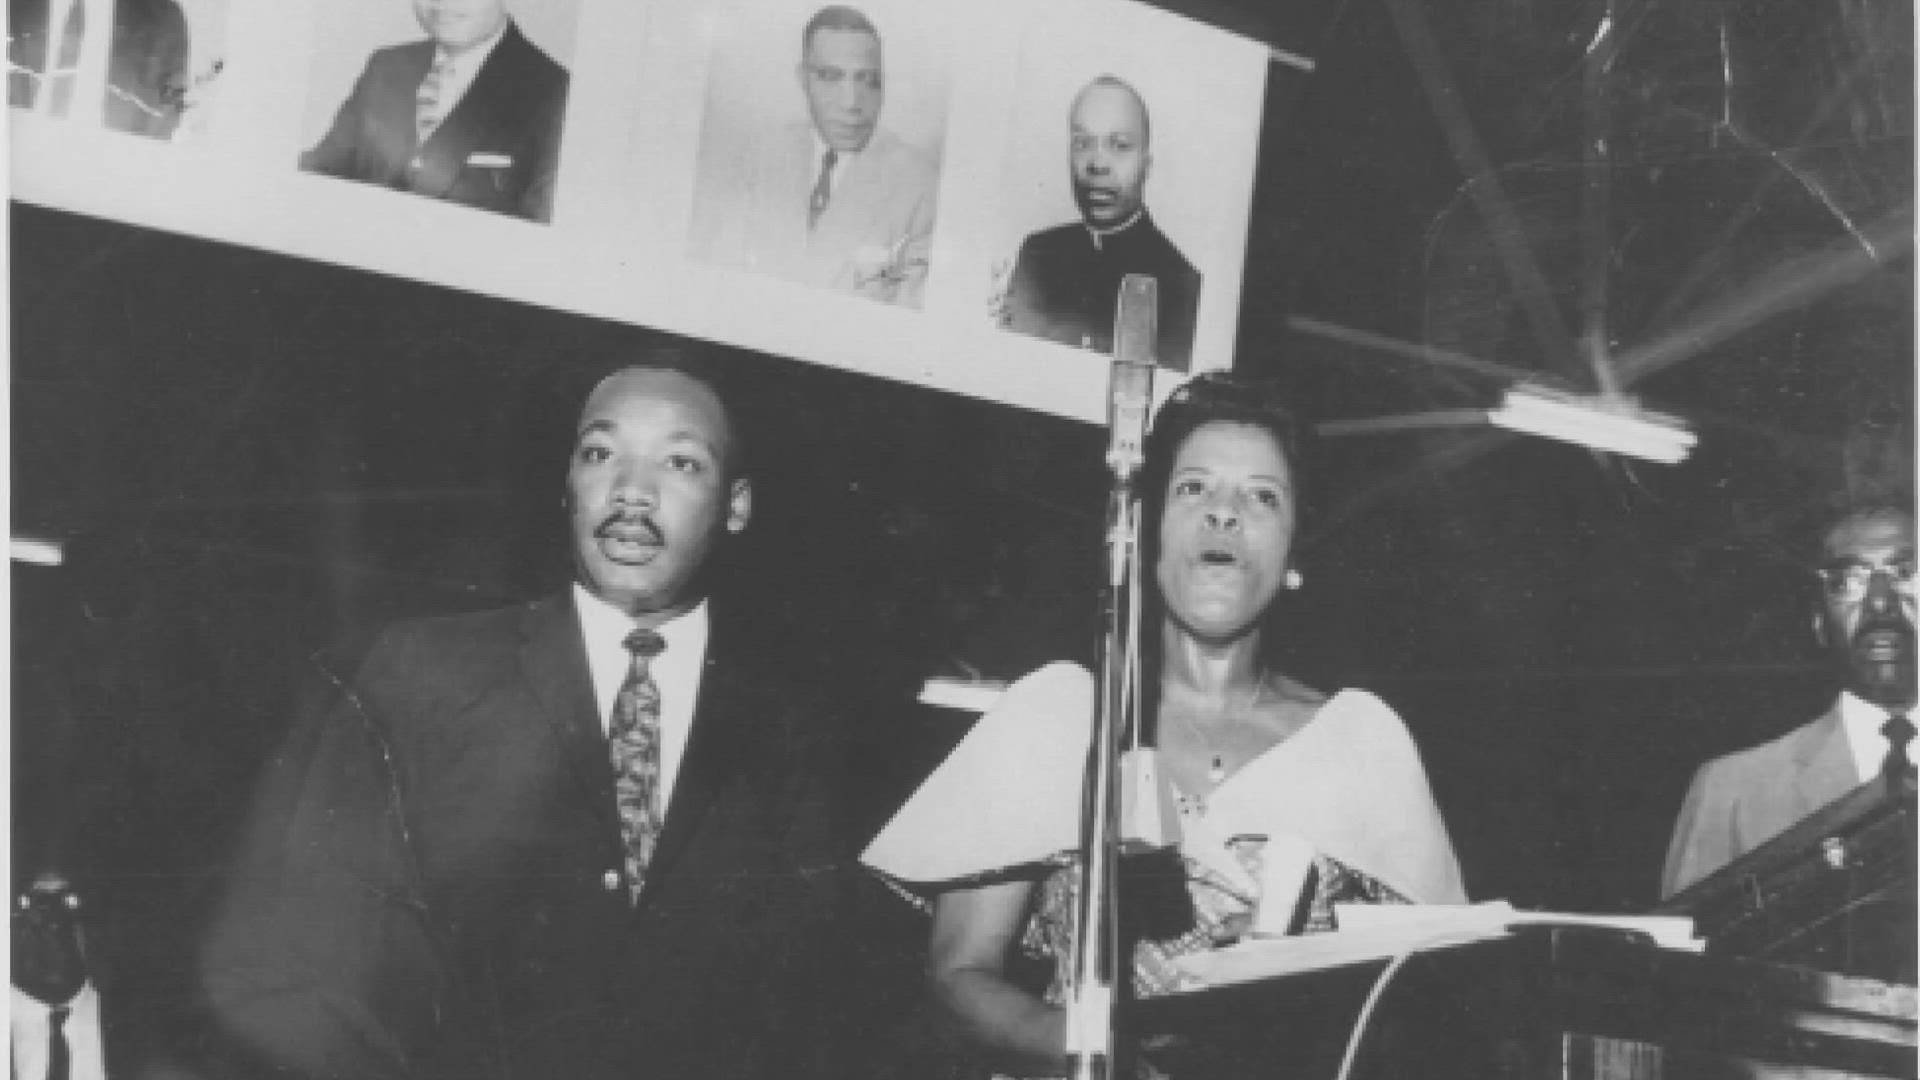 Photos in the University of Tennessee Library span decades of Tennessee history, and show some of the most important moments in Black history for the region.